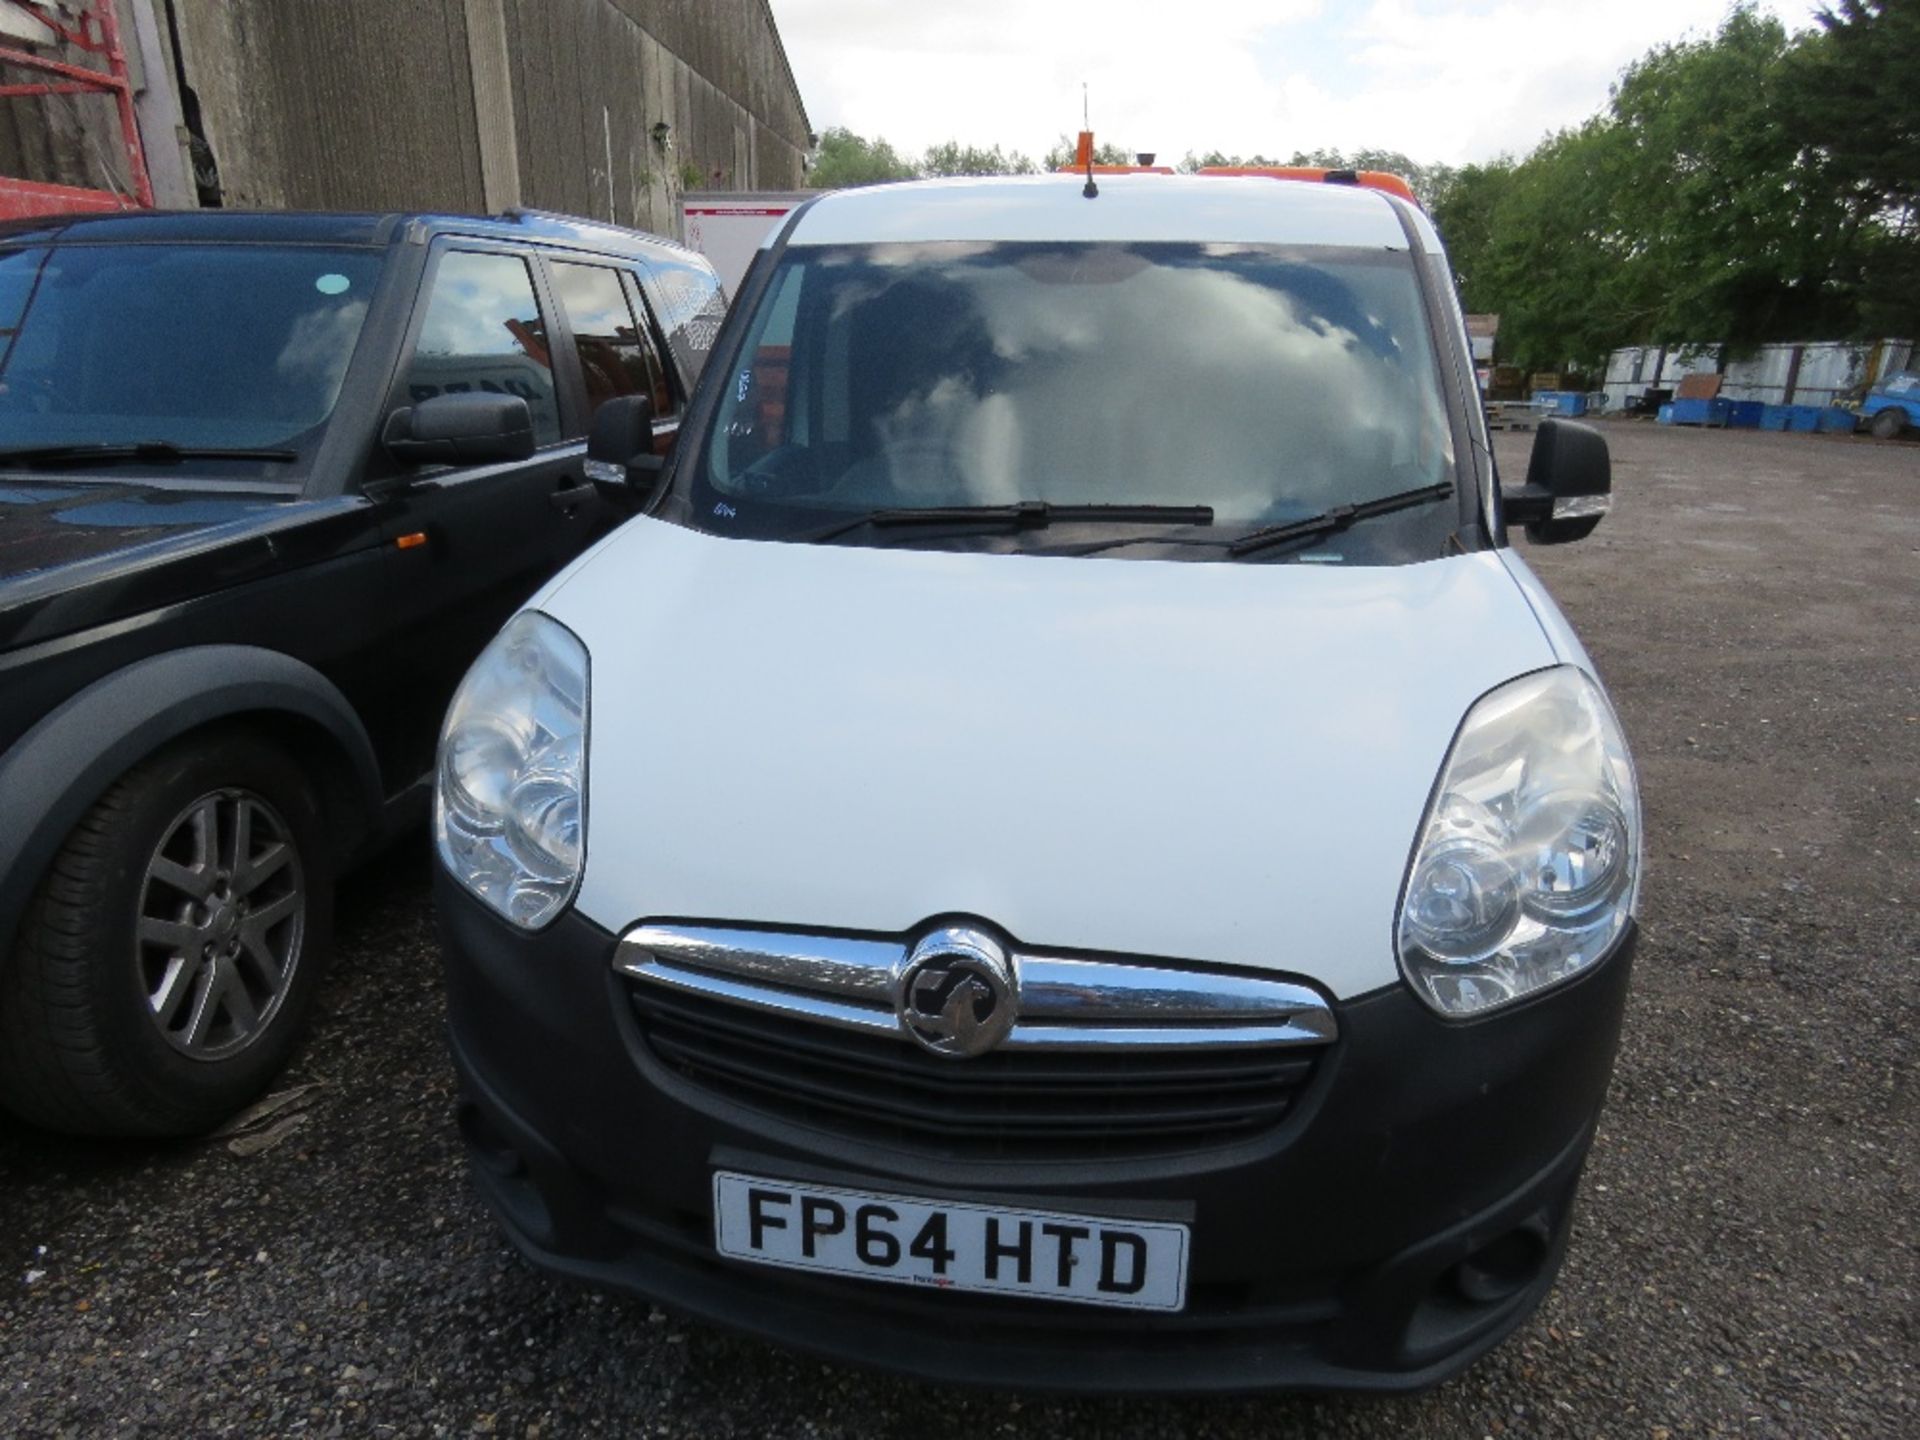 VAUXHALL COMBI PANEL VAN REG: FP64 HTD WITH V5, TESTED UNTIL 30TH OCTOBER 2022. ONE OWNER, OWNED FRO - Image 2 of 11